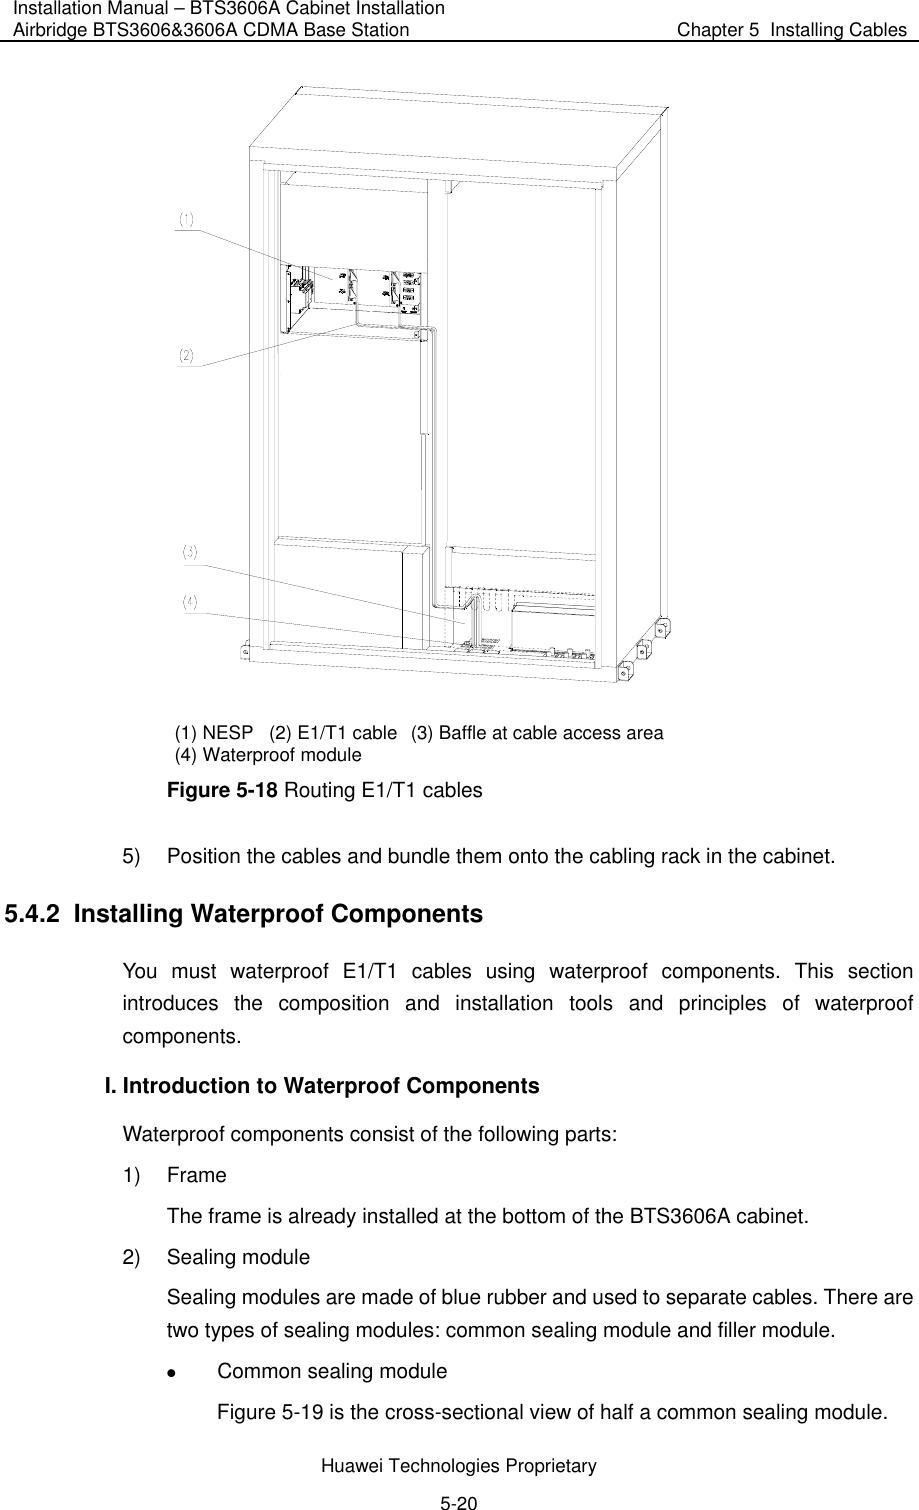 Installation Manual – BTS3606A Cabinet Installation Airbridge BTS3606&amp;3606A CDMA Base Station  Chapter 5  Installing Cables  Huawei Technologies Proprietary 5-20  (1) NESP  (2) E1/T1 cable  (3) Baffle at cable access area (4) Waterproof module Figure 5-18 Routing E1/T1 cables 5)  Position the cables and bundle them onto the cabling rack in the cabinet. 5.4.2  Installing Waterproof Components You must waterproof E1/T1 cables using waterproof components. This section introduces the composition and installation tools and principles of waterproof components. I. Introduction to Waterproof Components  Waterproof components consist of the following parts: 1) Frame The frame is already installed at the bottom of the BTS3606A cabinet. 2) Sealing module Sealing modules are made of blue rubber and used to separate cables. There are two types of sealing modules: common sealing module and filler module. z Common sealing module  Figure 5-19 is the cross-sectional view of half a common sealing module.  